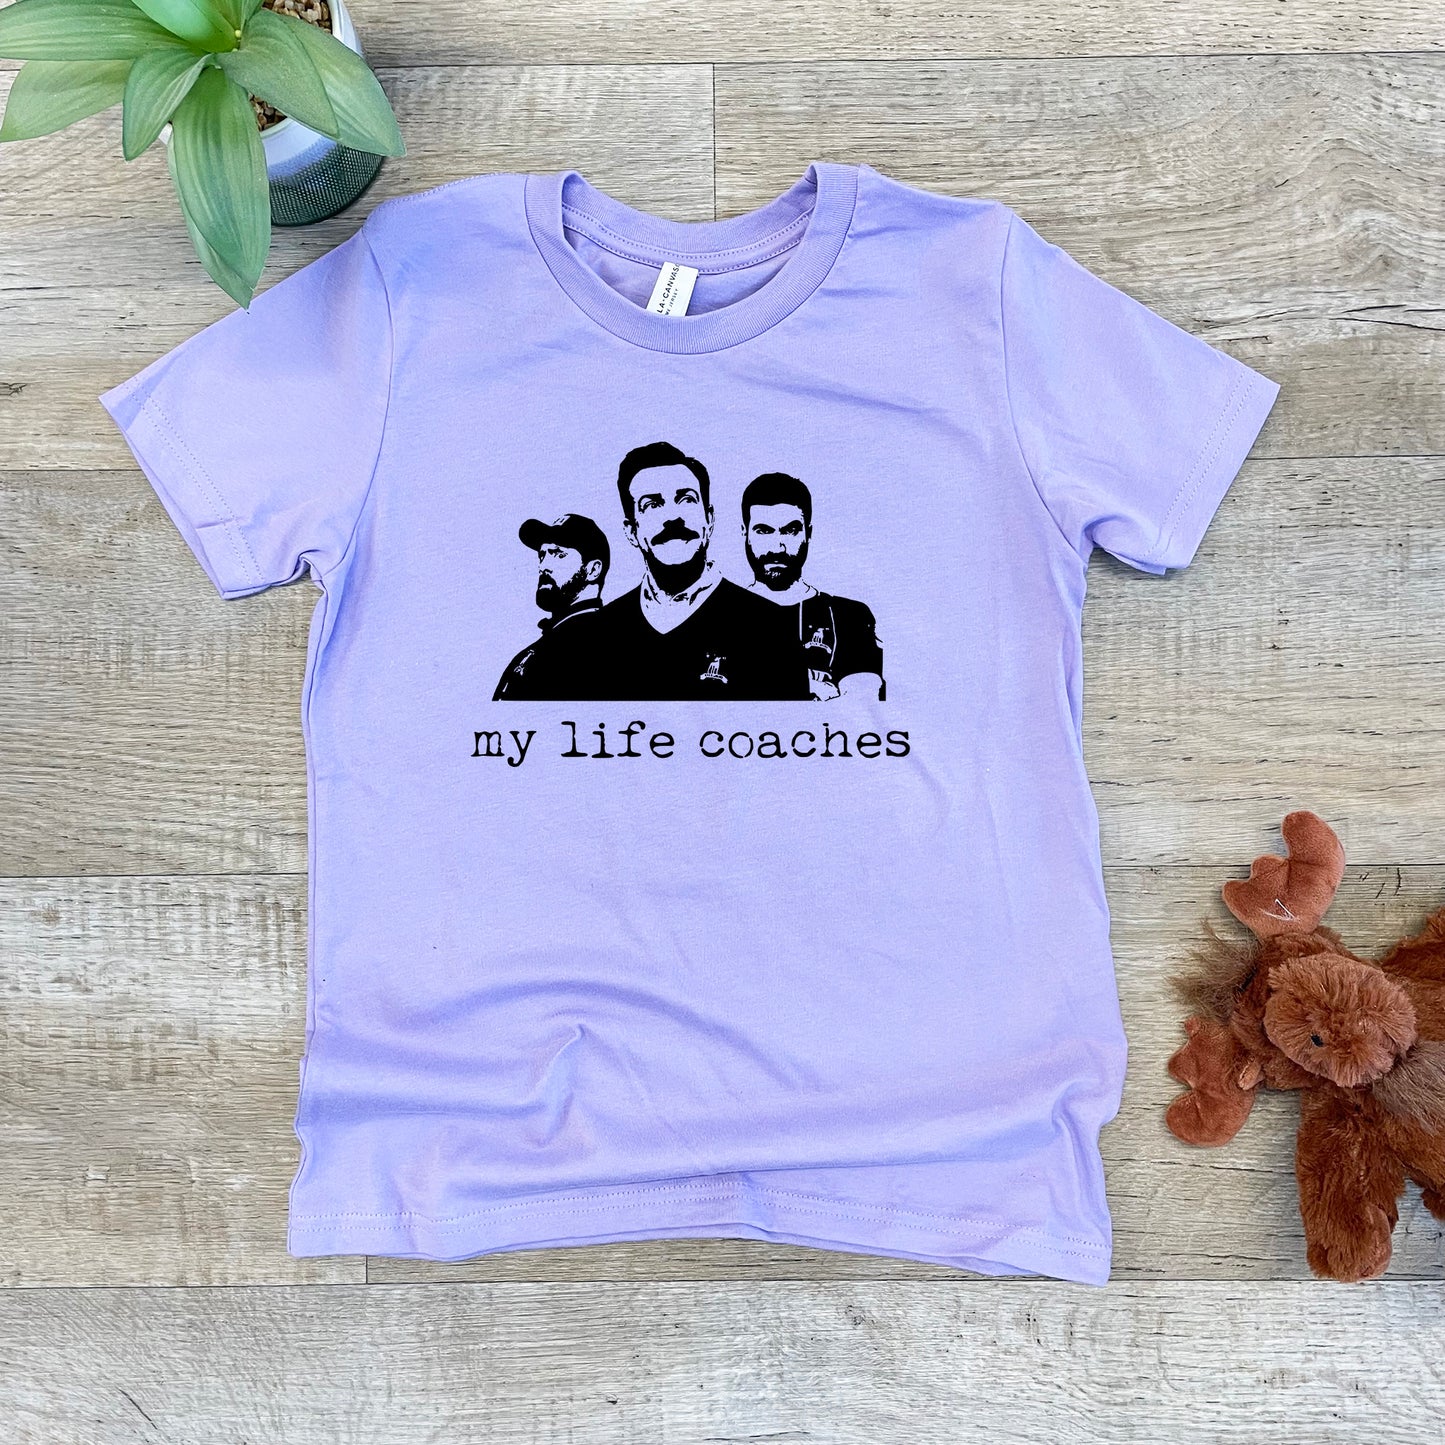 My Life Coaches (Ted Lasso) - Kid's Tee - Columbia Blue or Lavender